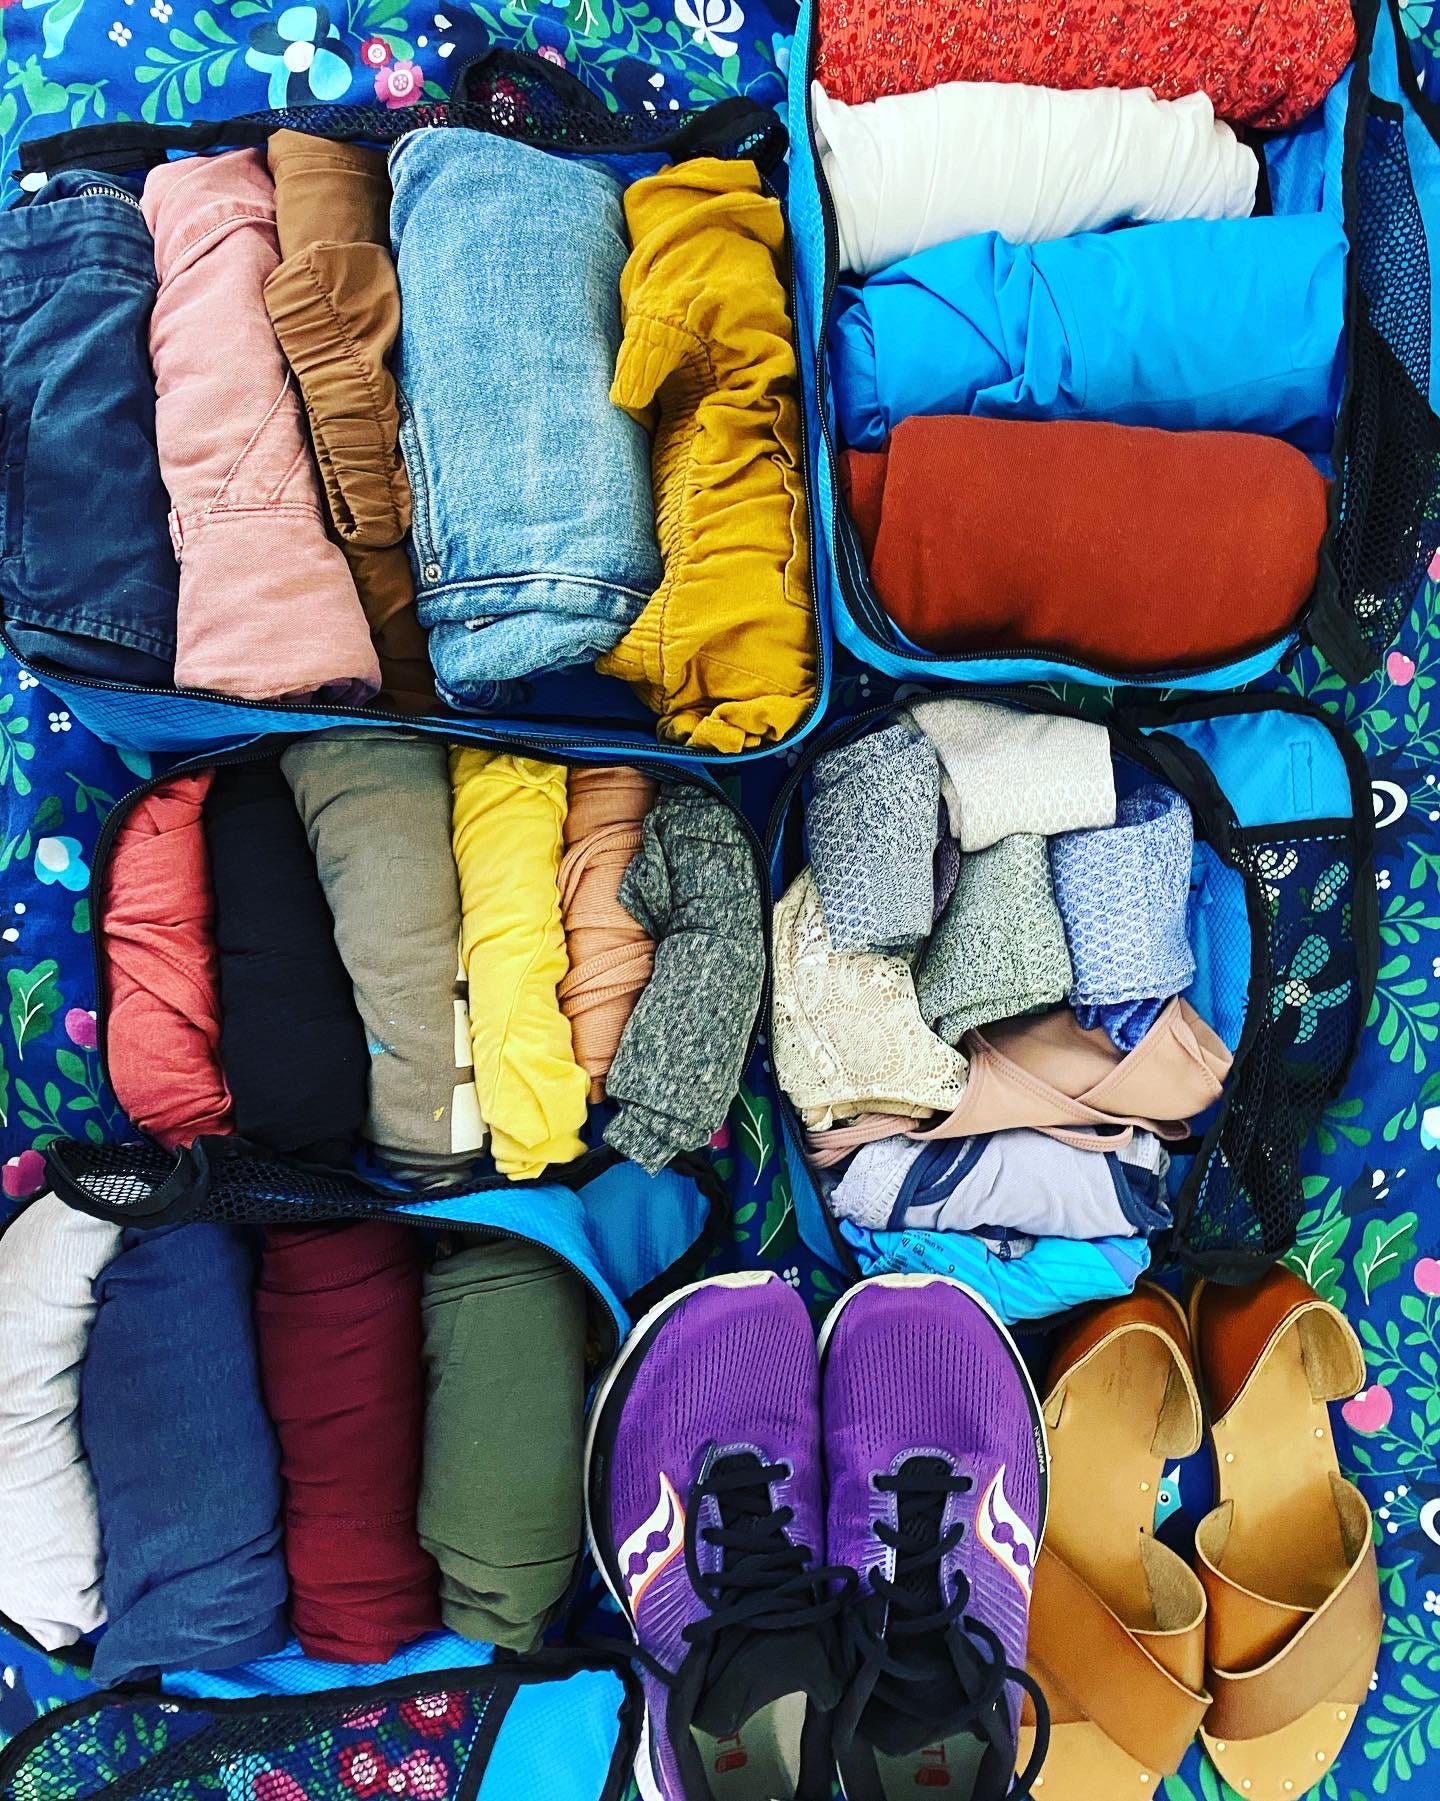 Packing cubes and shoes